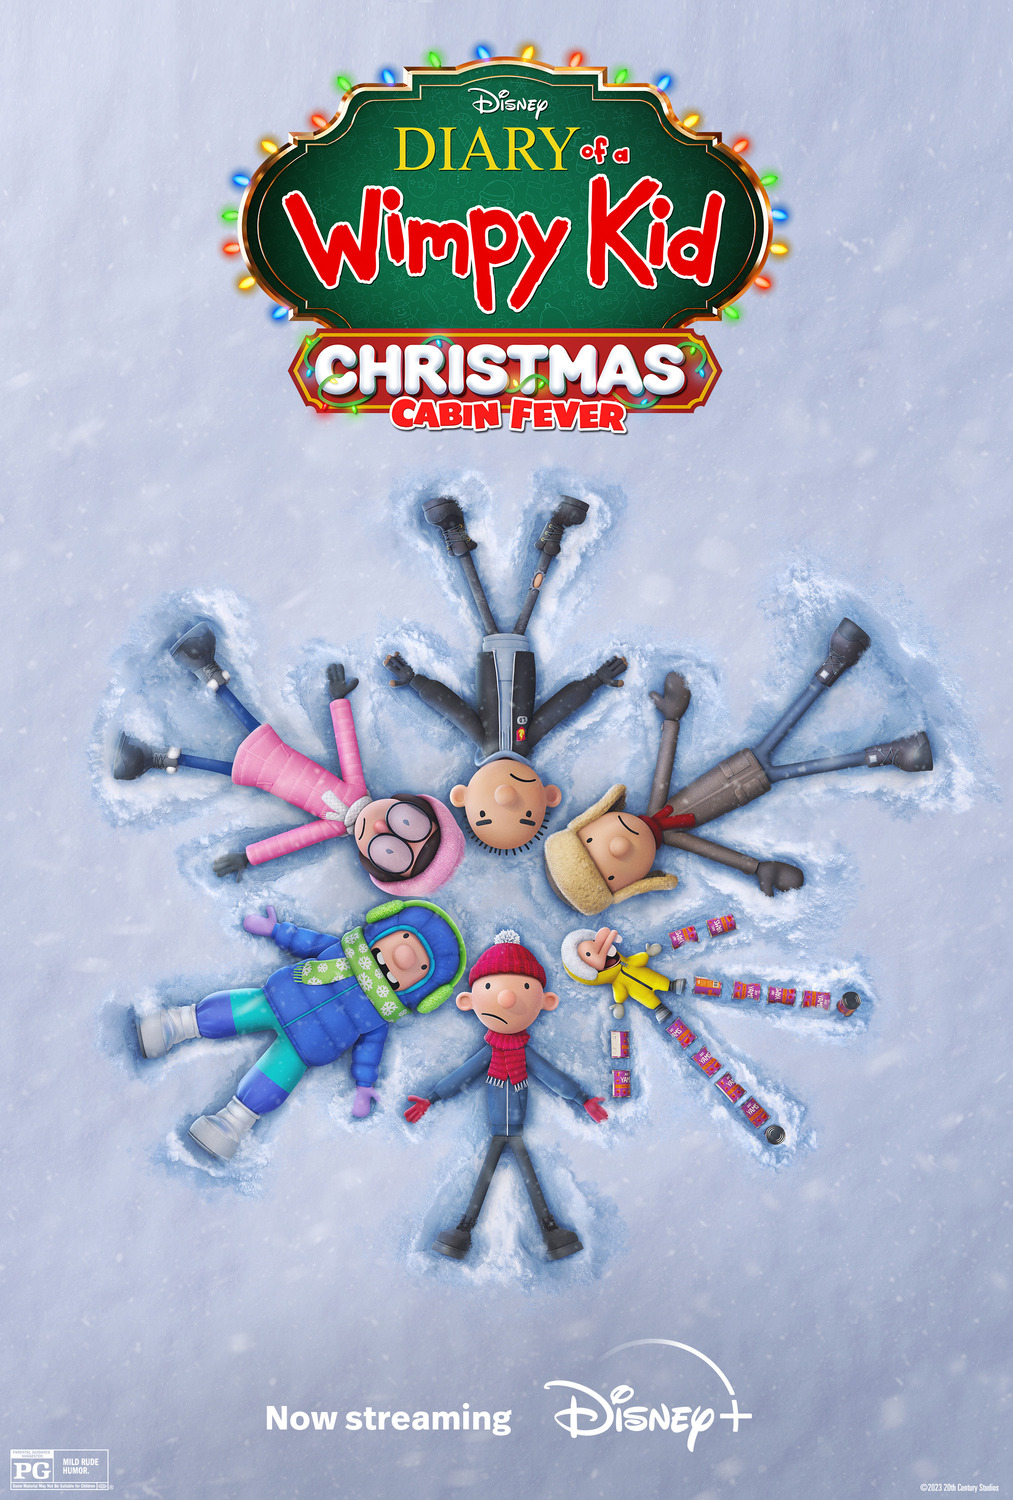 Extra Large Movie Poster Image for Diary of a Wimpy Kid Christmas: Cabin Fever (#4 of 4)